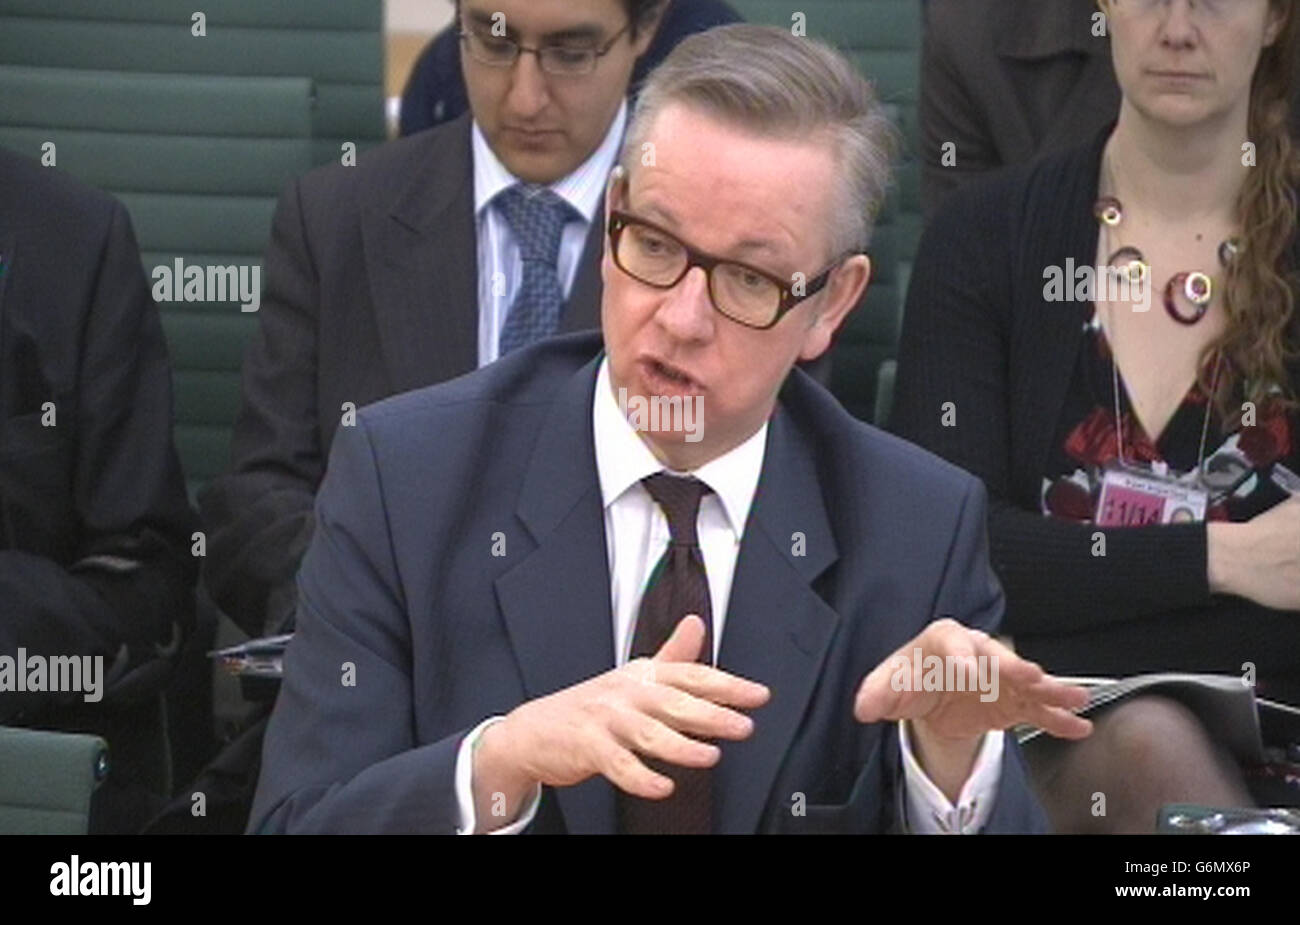 Education Secretary Michael Gove answers questions at a House of Commons Education Select Committee on school accountability, qualifications and curriculum reform at Portcullis House in London. Stock Photo